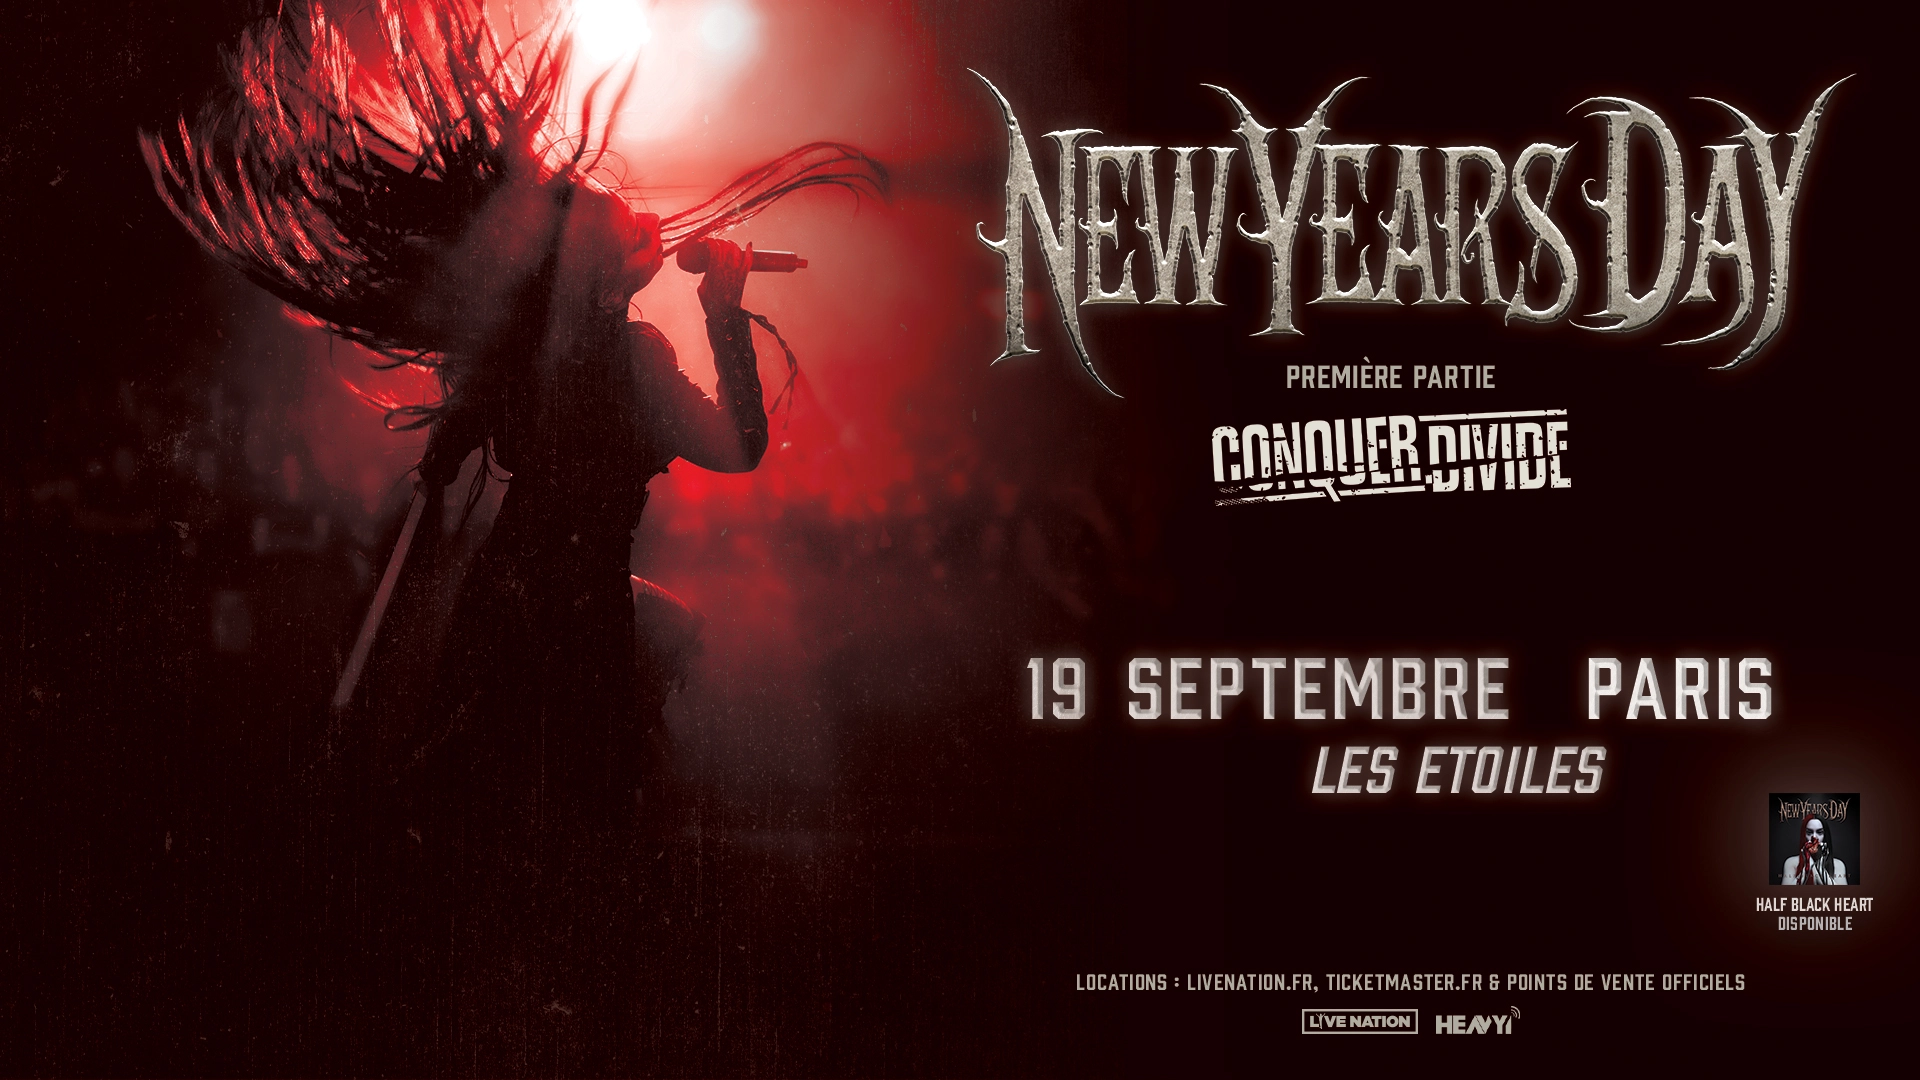 New Years Day at Les Etoiles Tickets